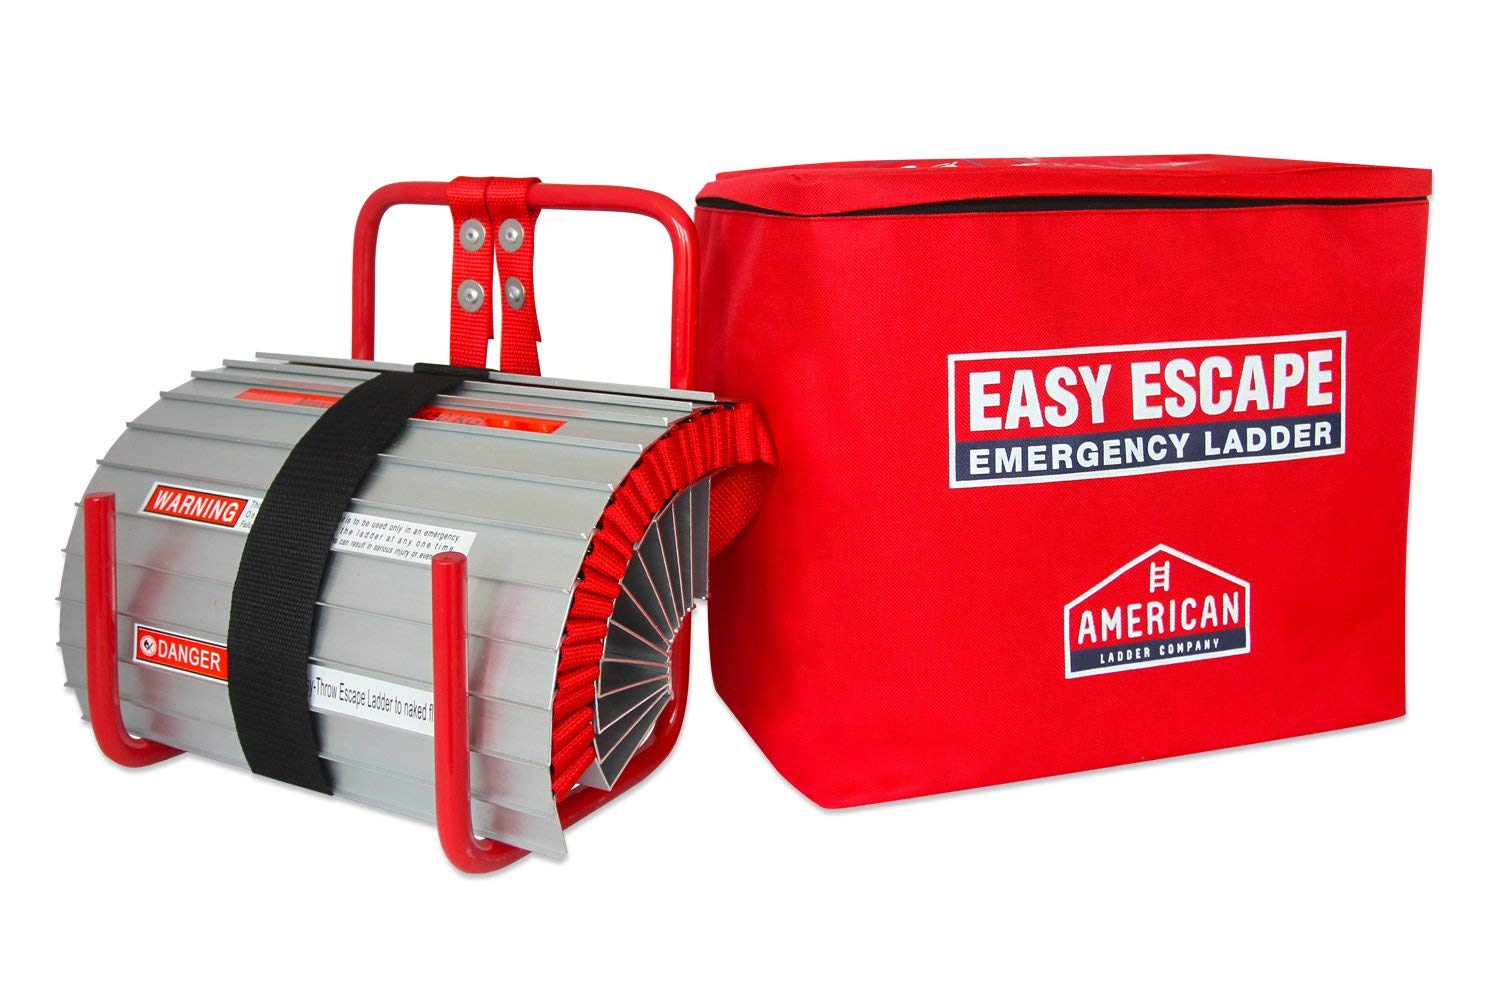 Easy Escape 2 Story Emergency Fire Escape Ladder by American Ladder Co | 13ft Portable Escape Ladder | Small and Easy to Store | Full Customer Warranty